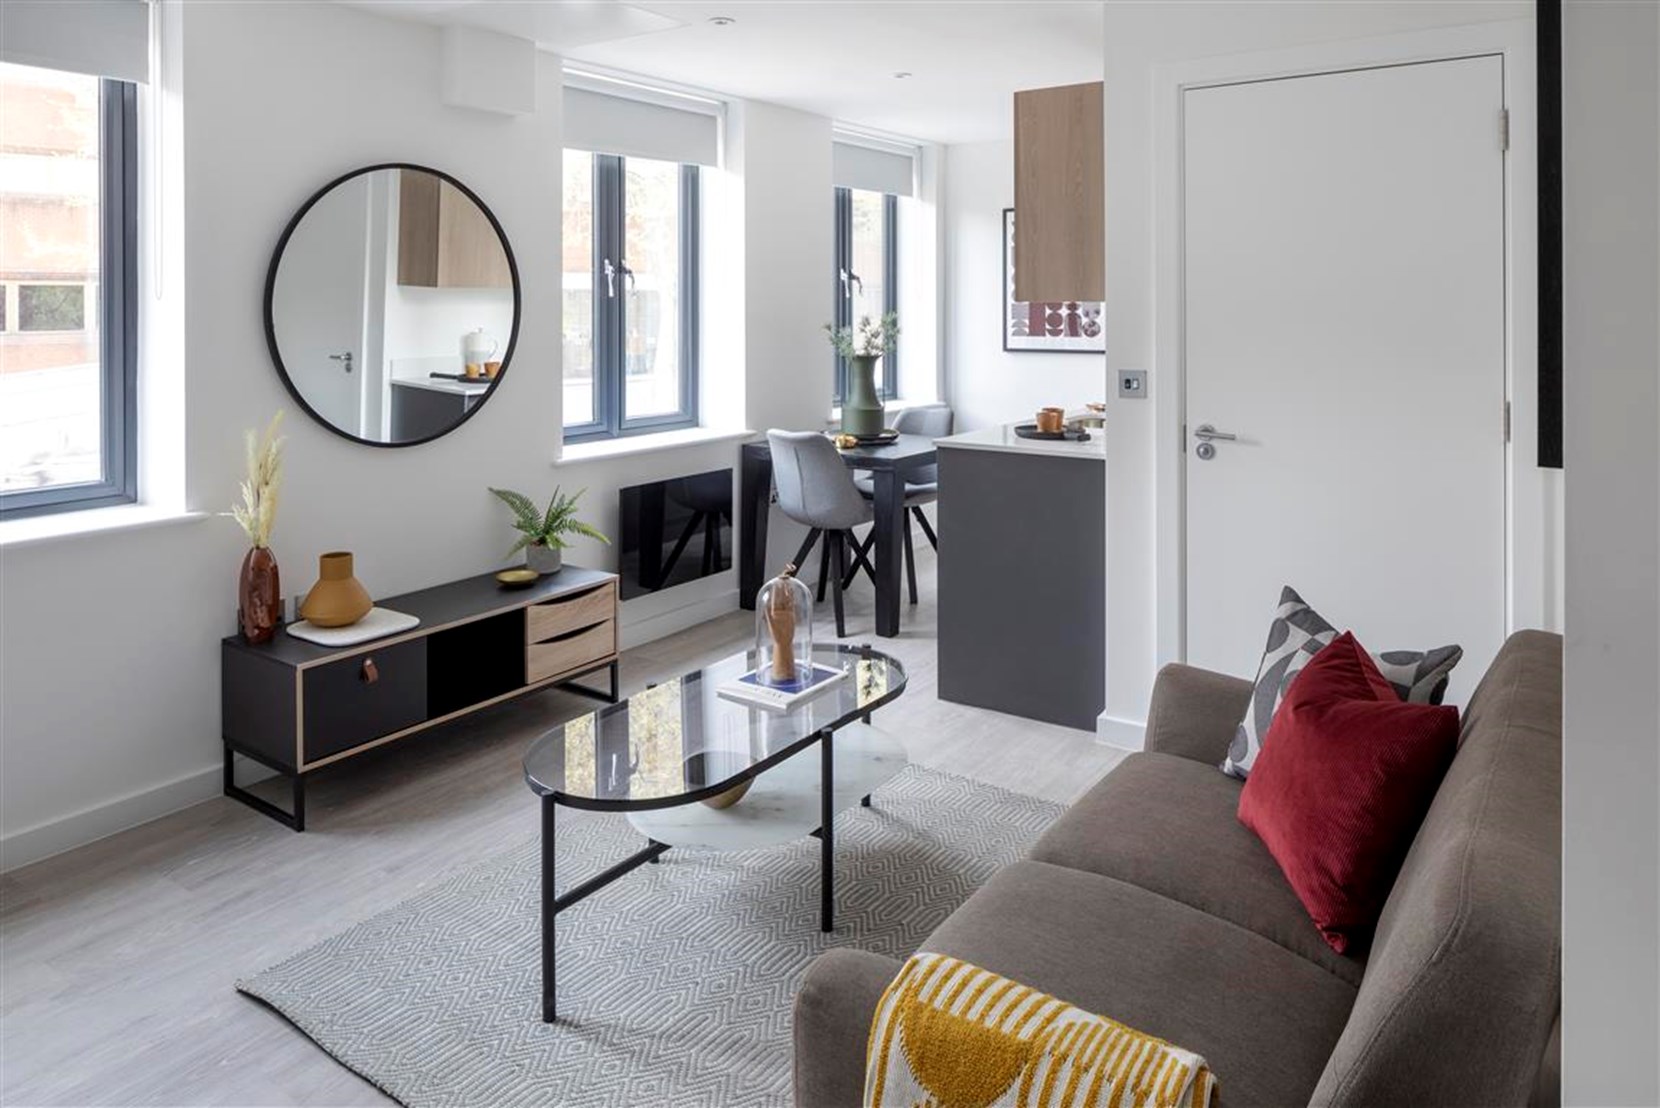 Apartments to Rent by JLL at Stratford Studios, Newham, E15, living kitchen area